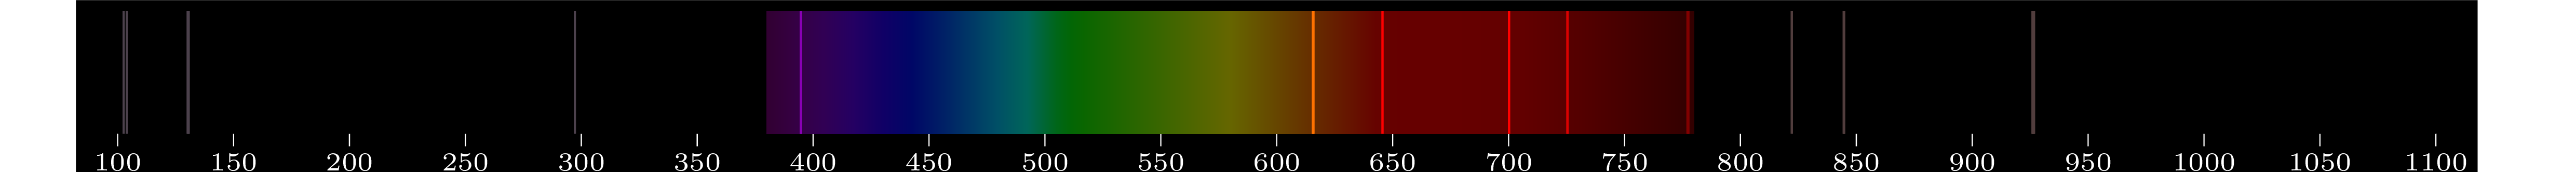 emmision spectra of element O